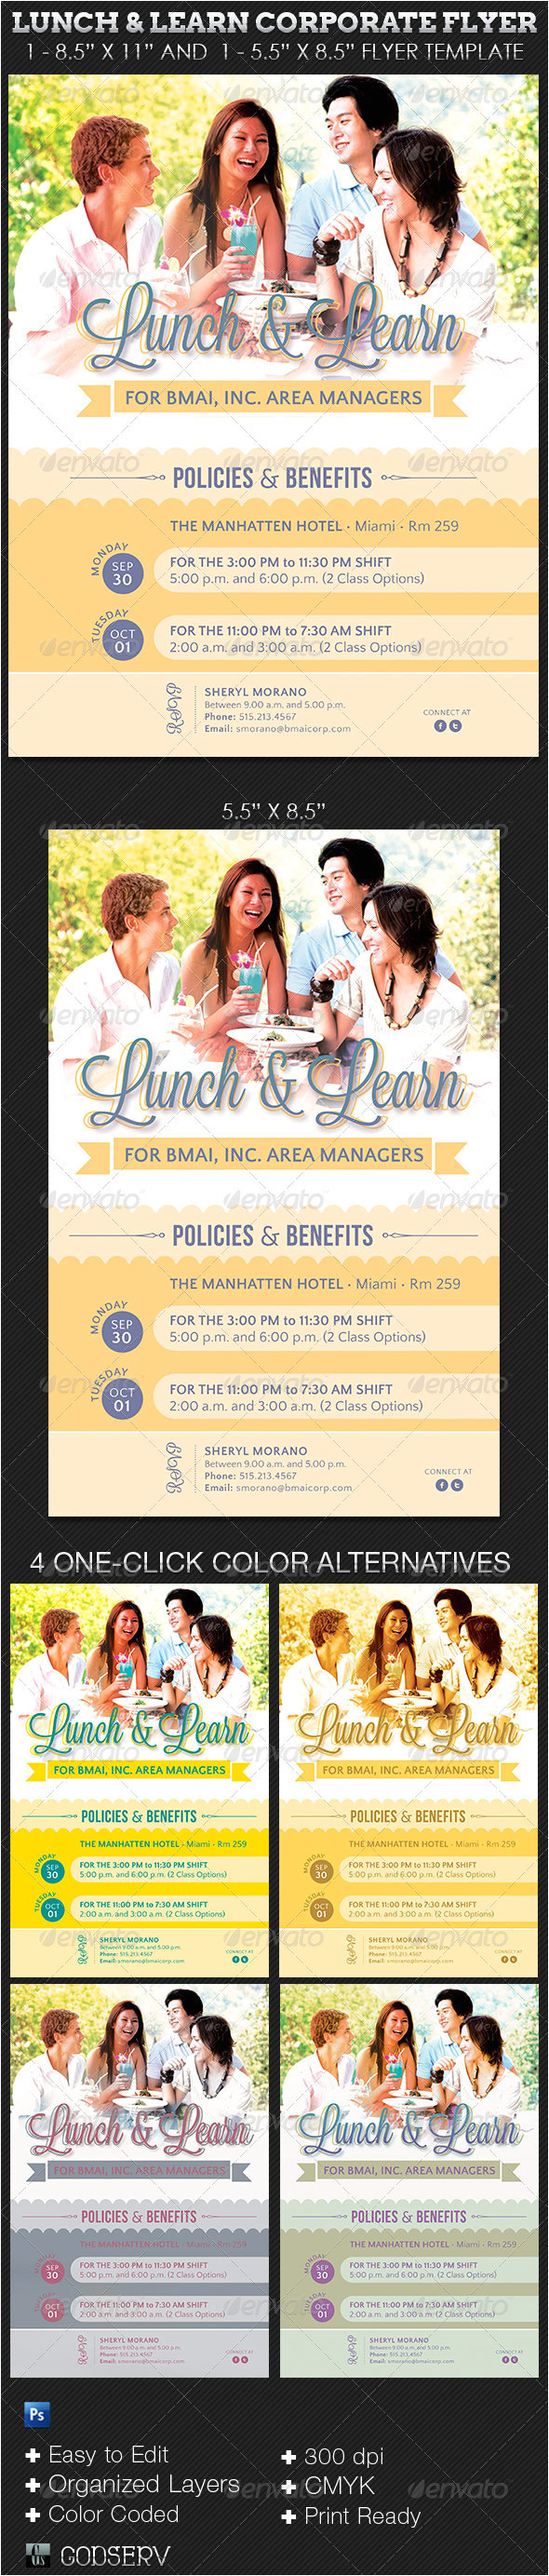 Lunch and Learn Flyer Template Lunch and Learn Corporate Flyer Template On Behance